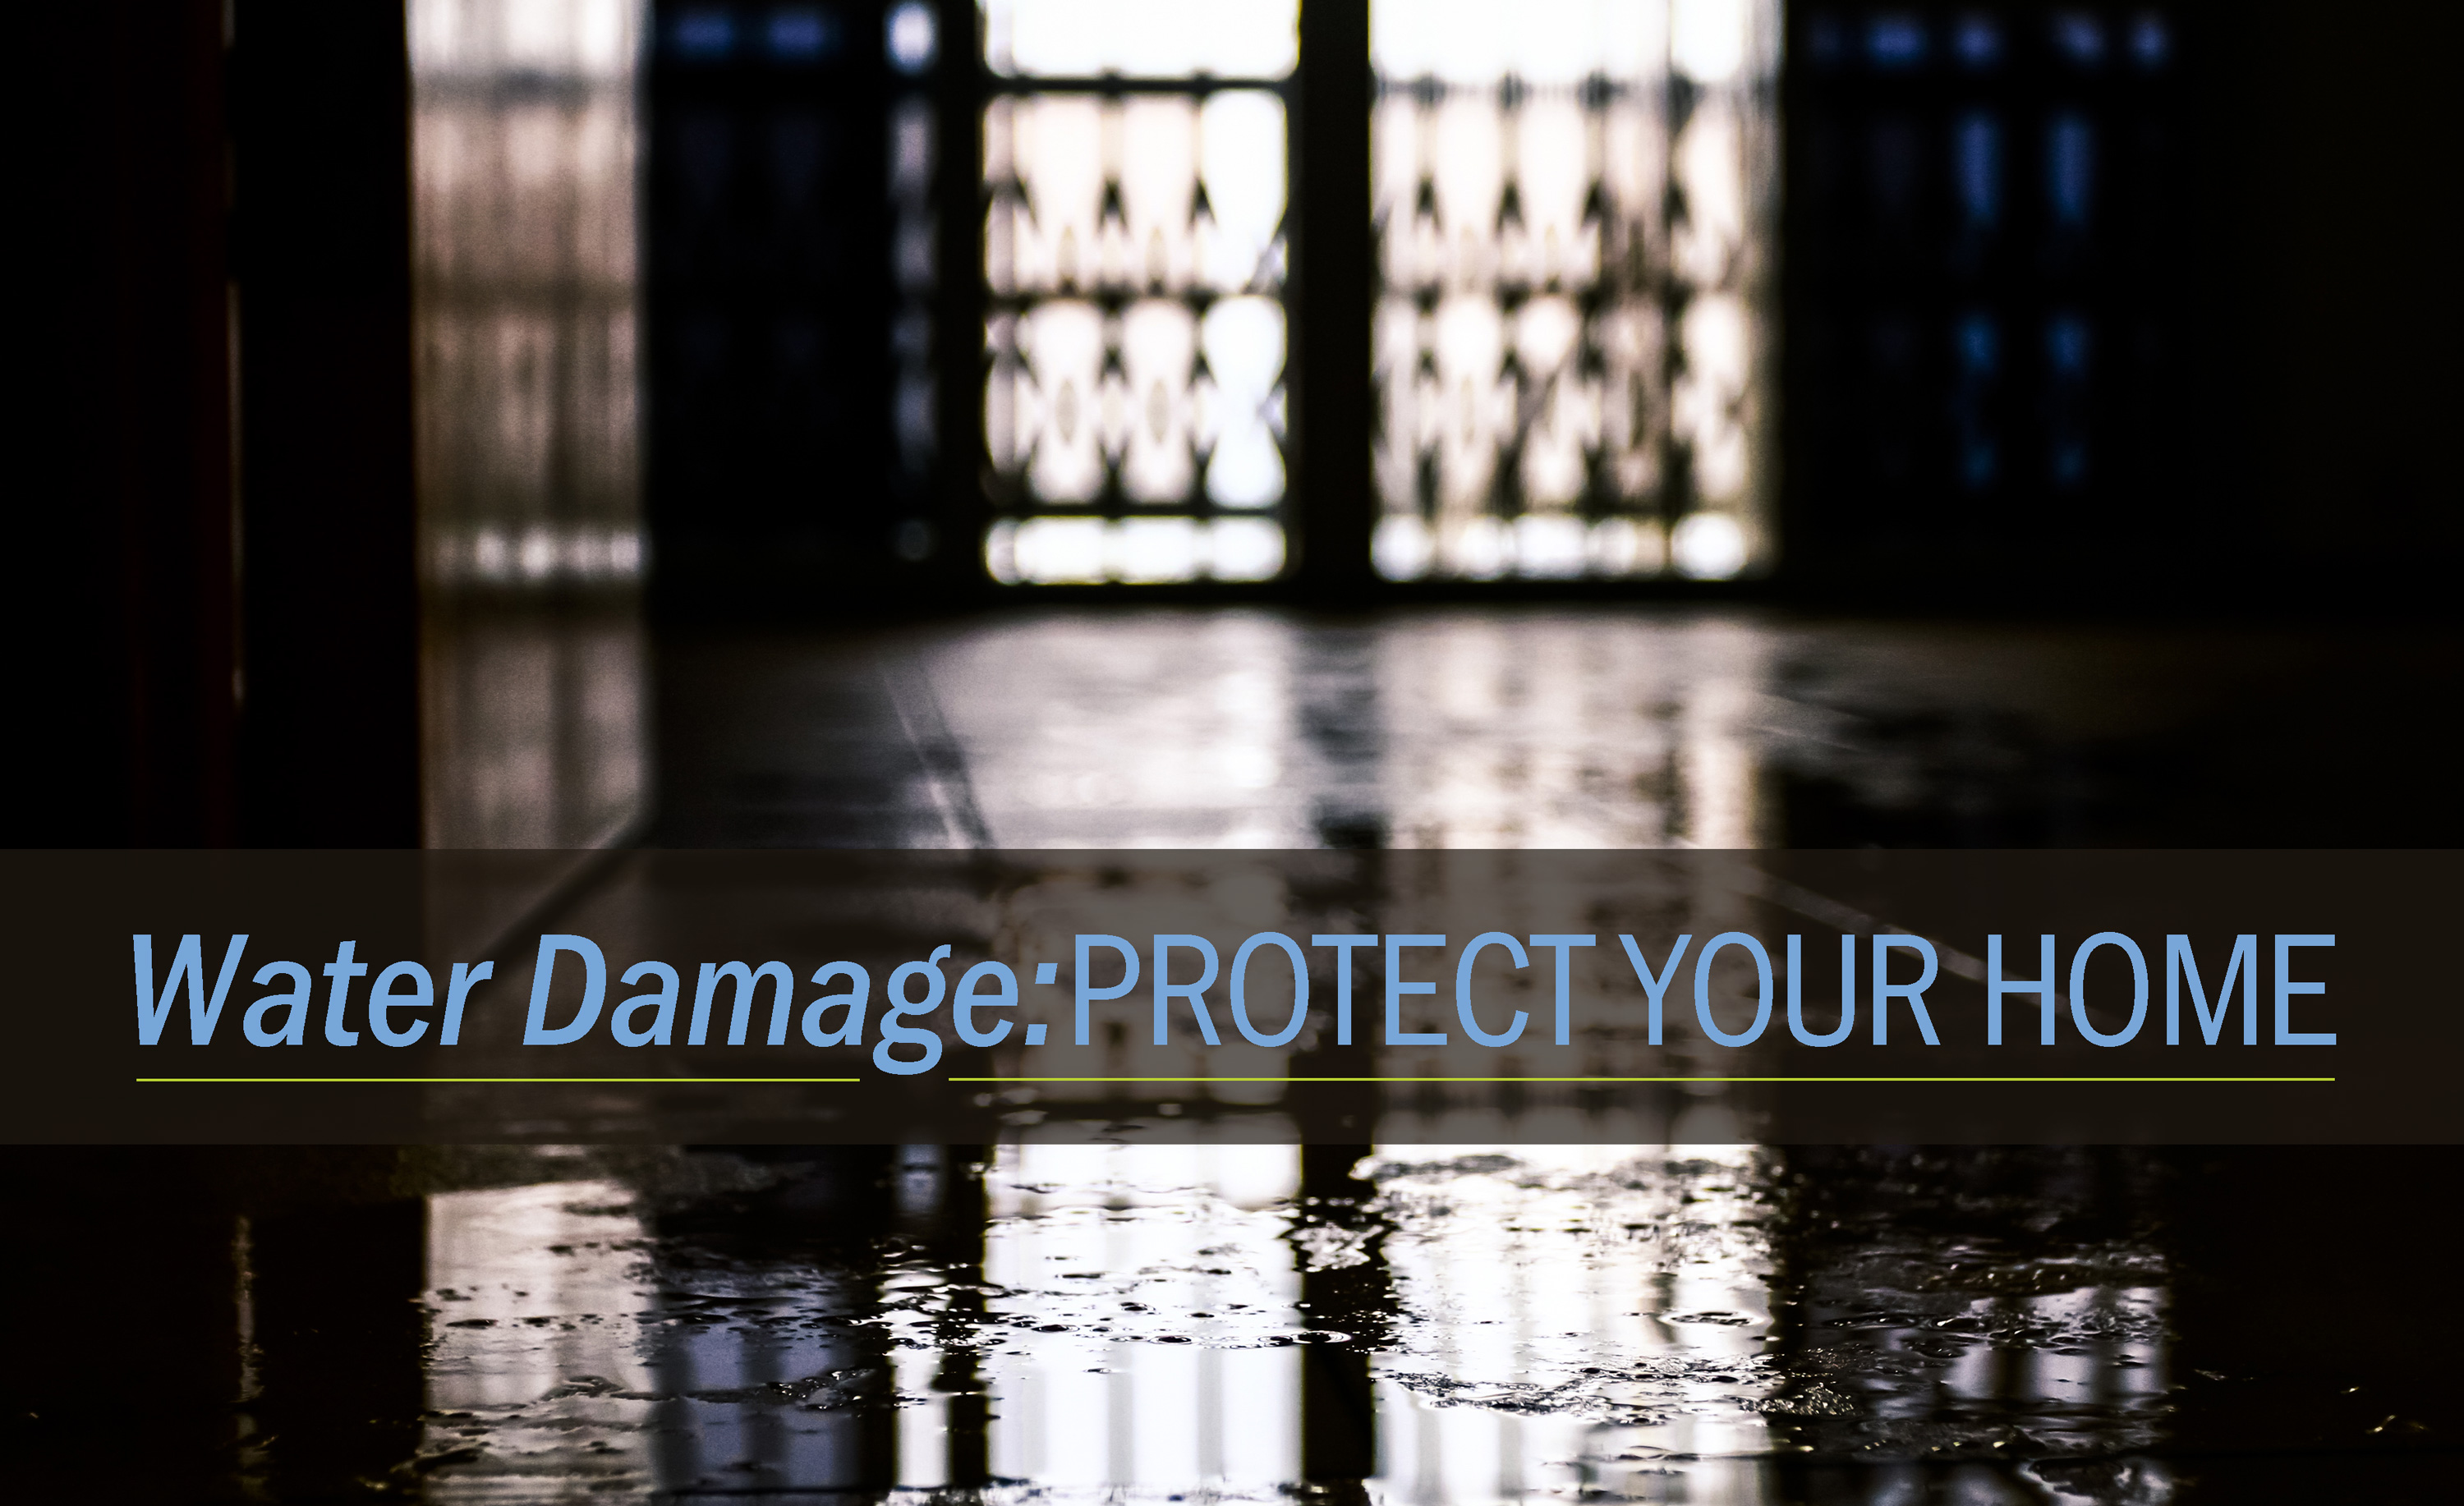 Water leak detection devices can protect your home from damage